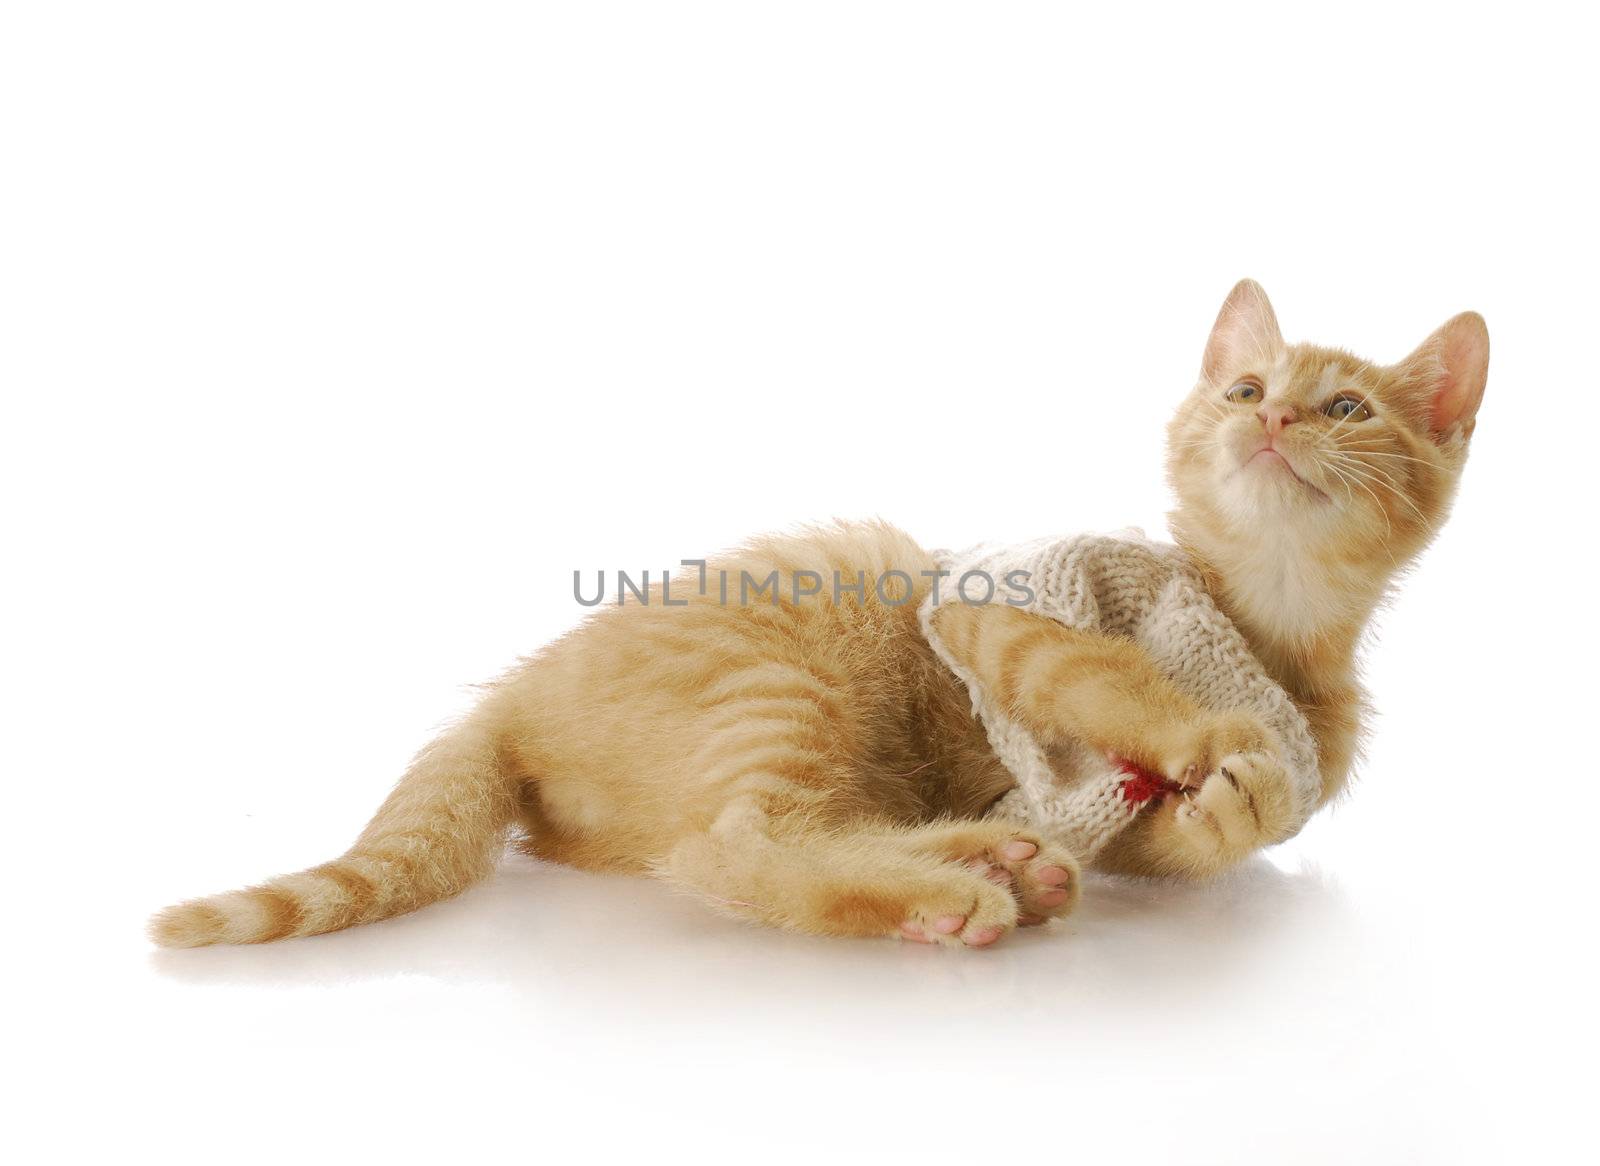 adorable nine week old kitten wearing knit sweater laying down with reflection on white background